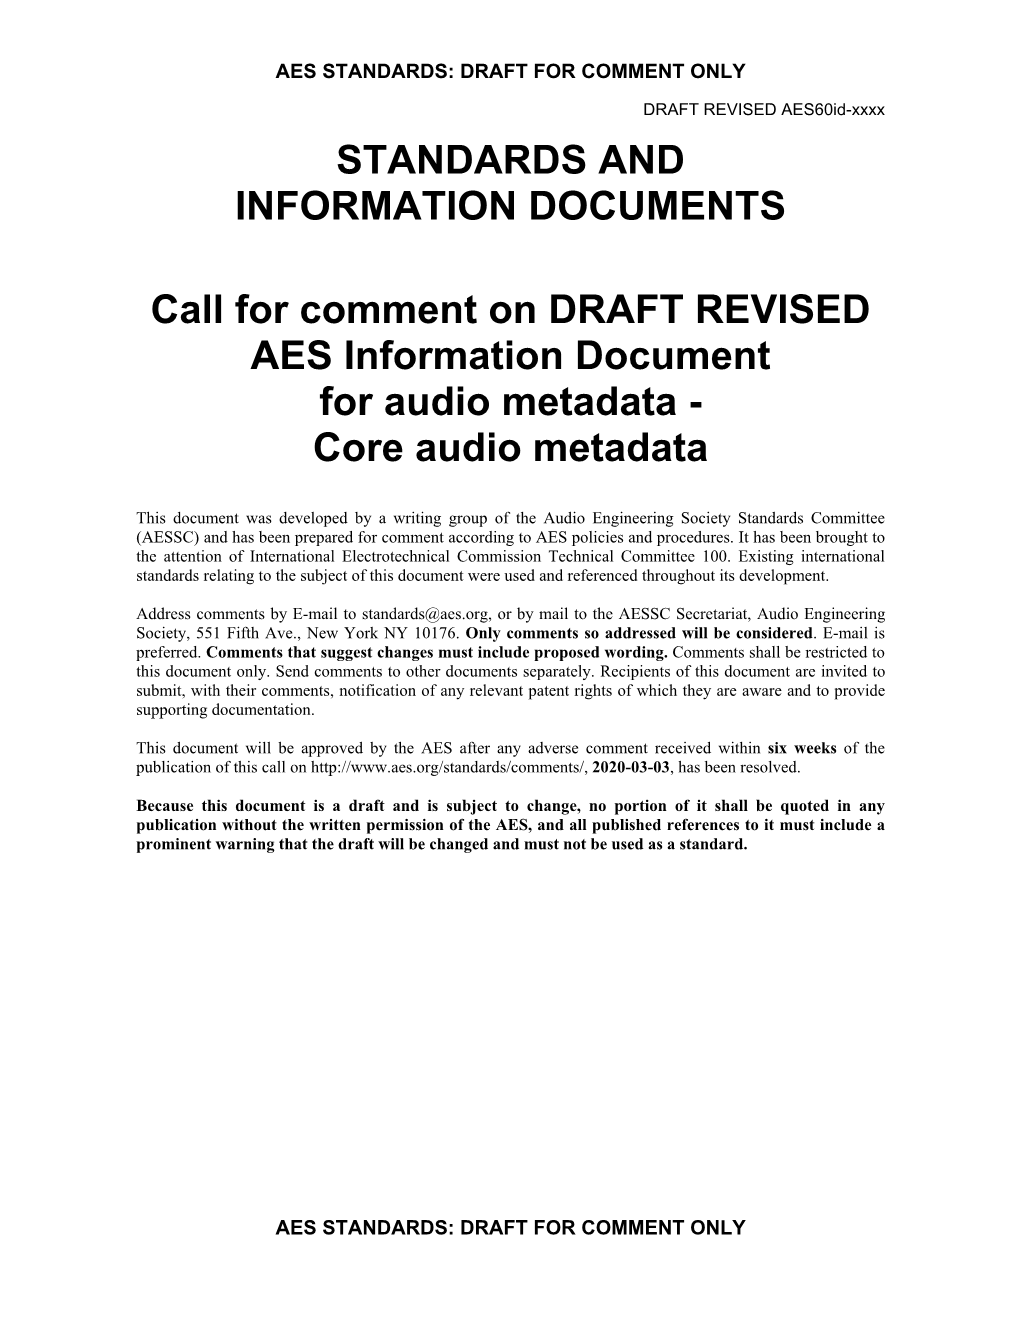 Aes60id AES Information Document for Audio Metadata